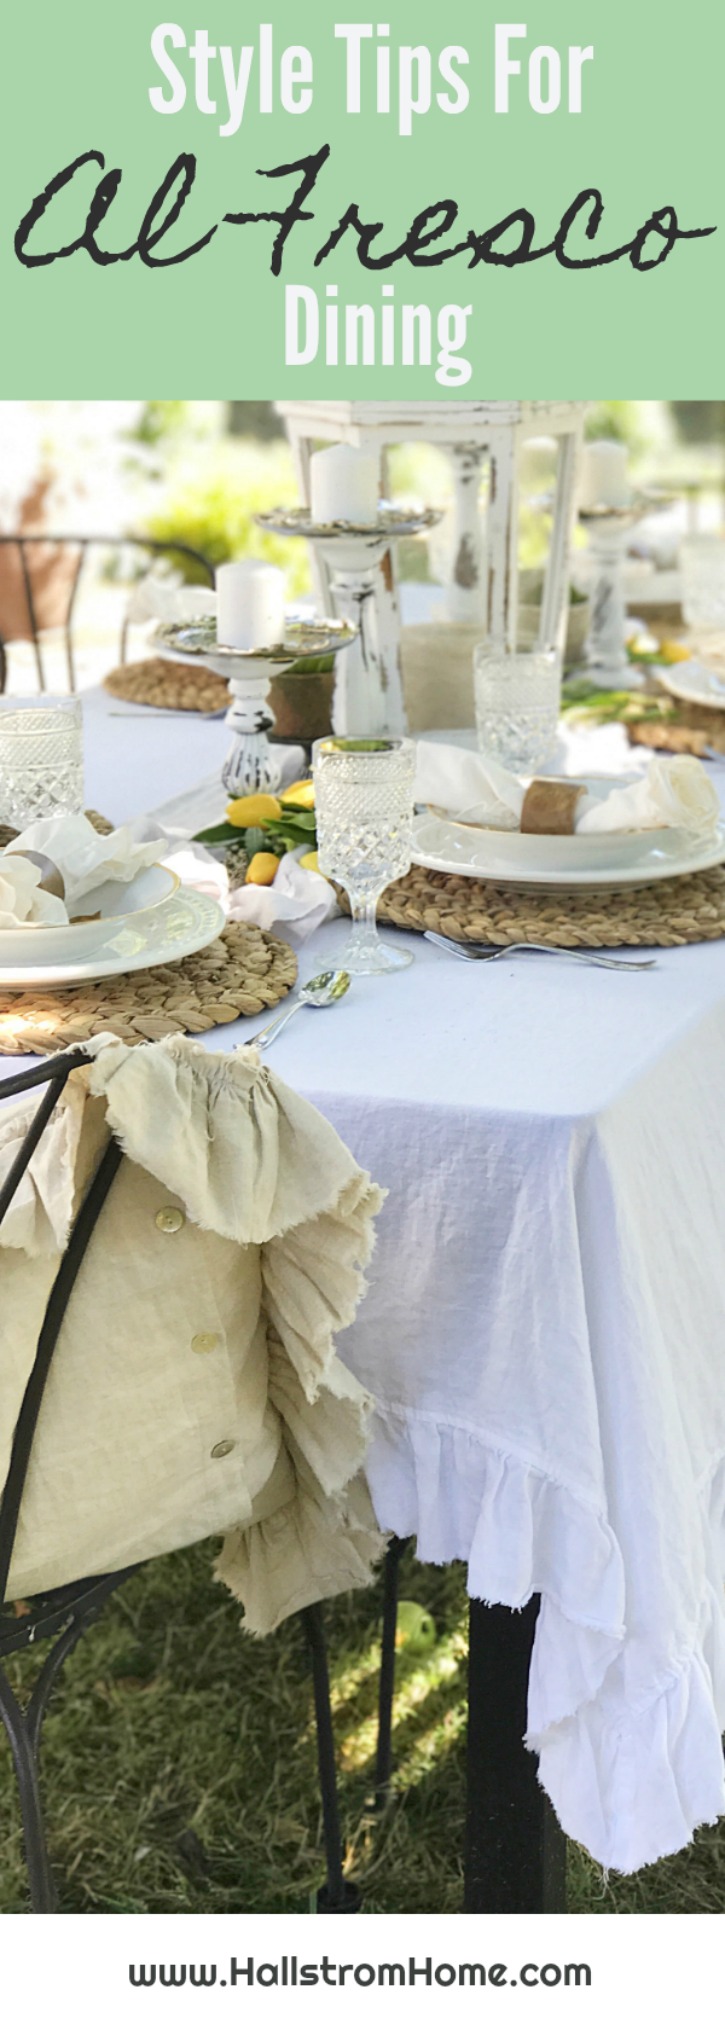 Styles and Tips for Al Fresco Summer Dining